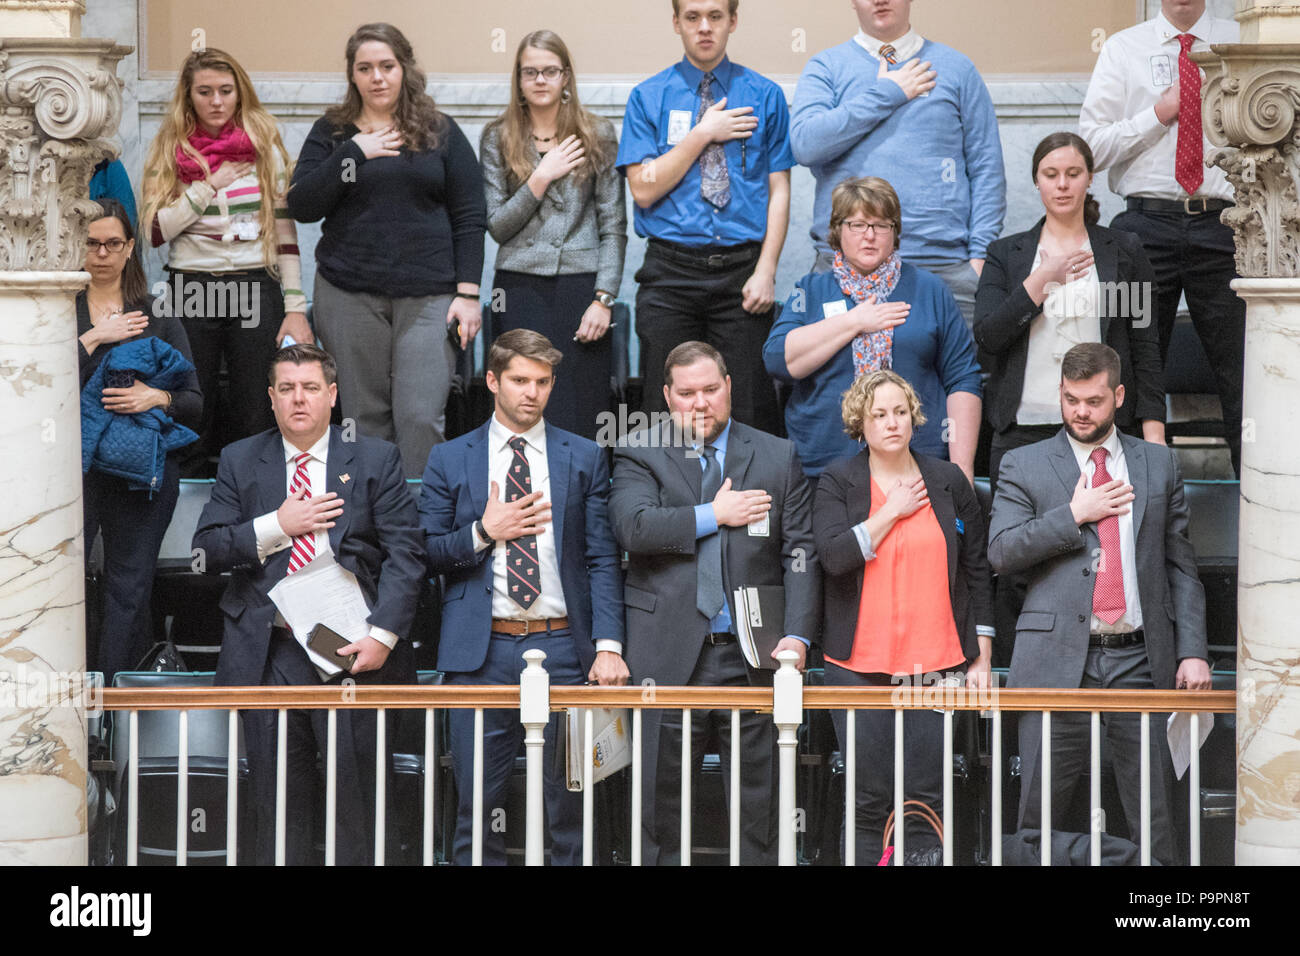 Group of people stand up for the national anthem inside the Maryland State House, Annapolis, Maryland Stock Photo